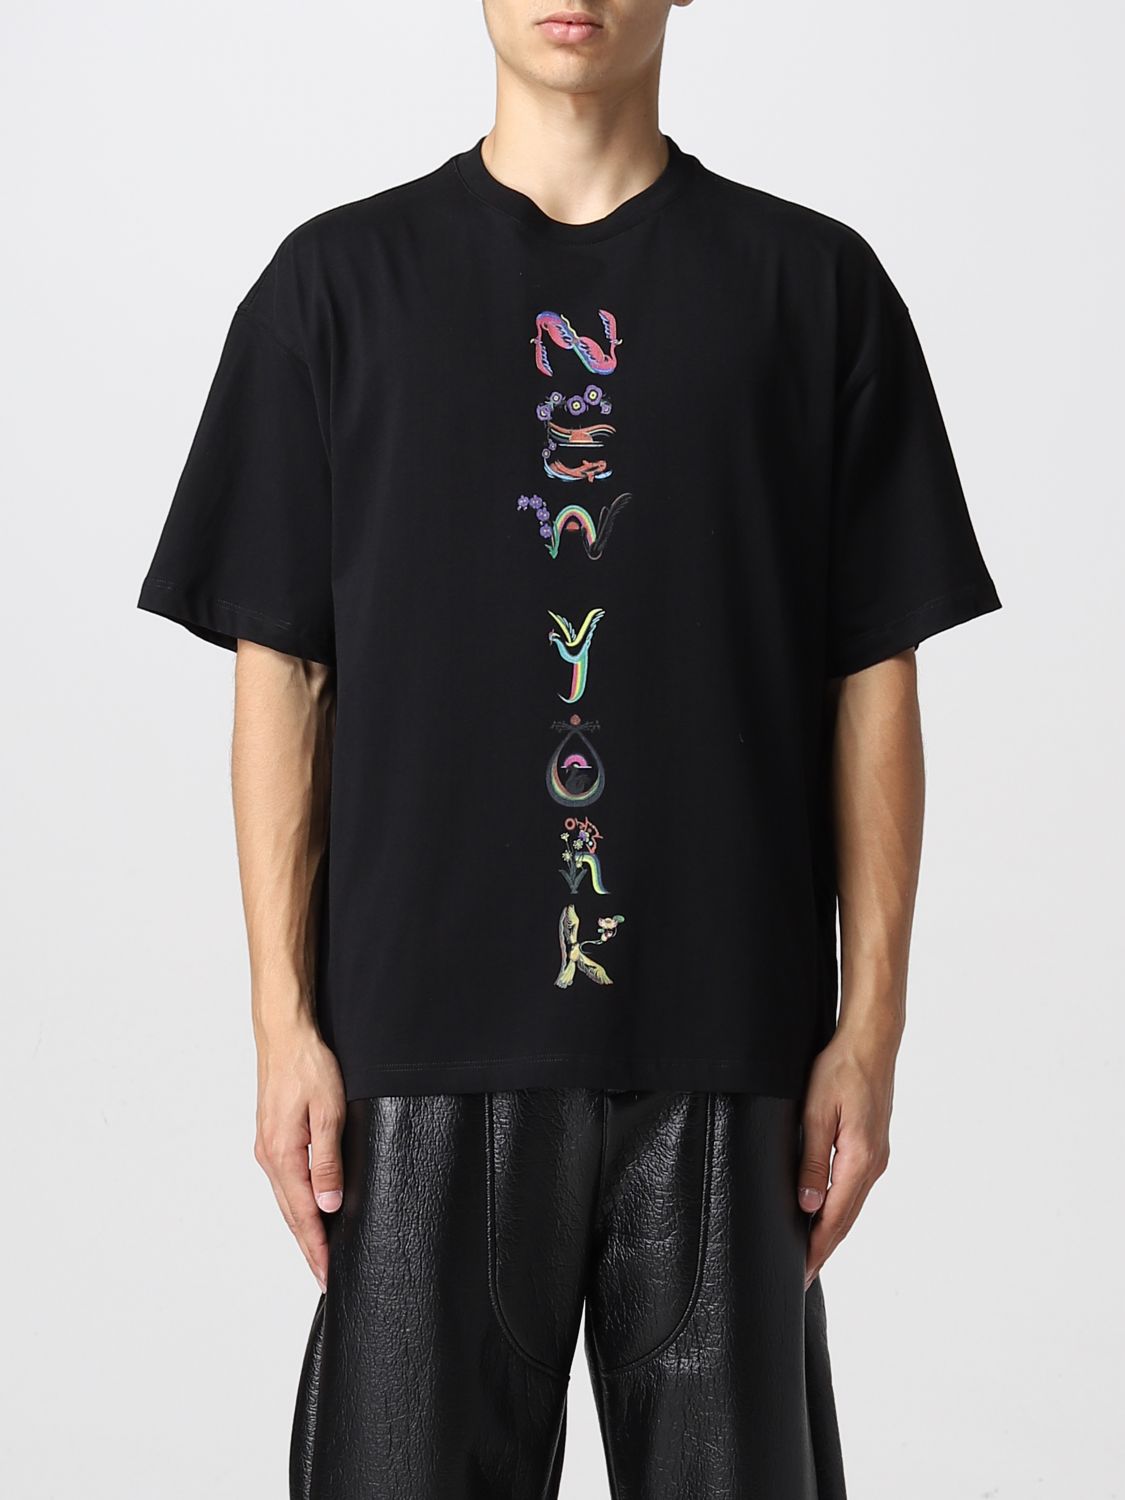 OPENING CEREMONY: t-shirt for man - Black | Opening Ceremony t-shirt ...